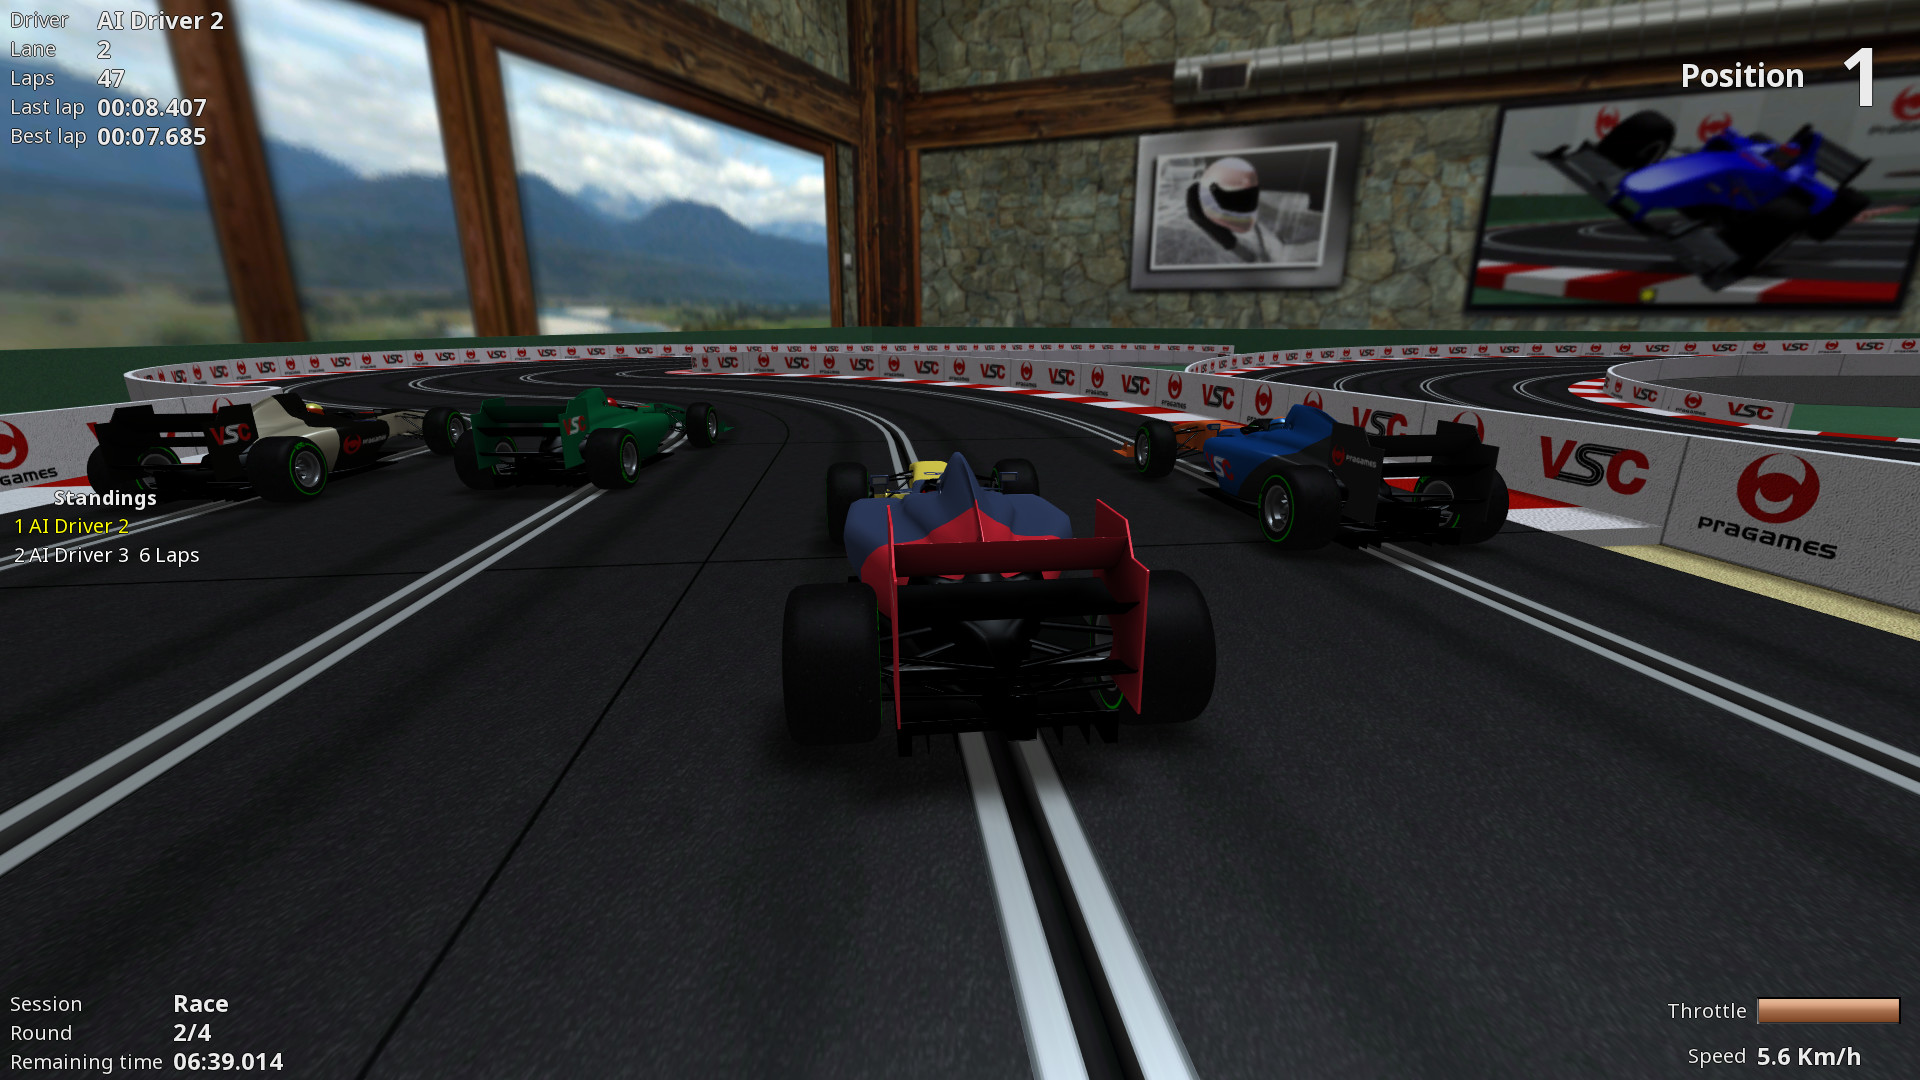 6 Of The Best Racing Games To Play On PC